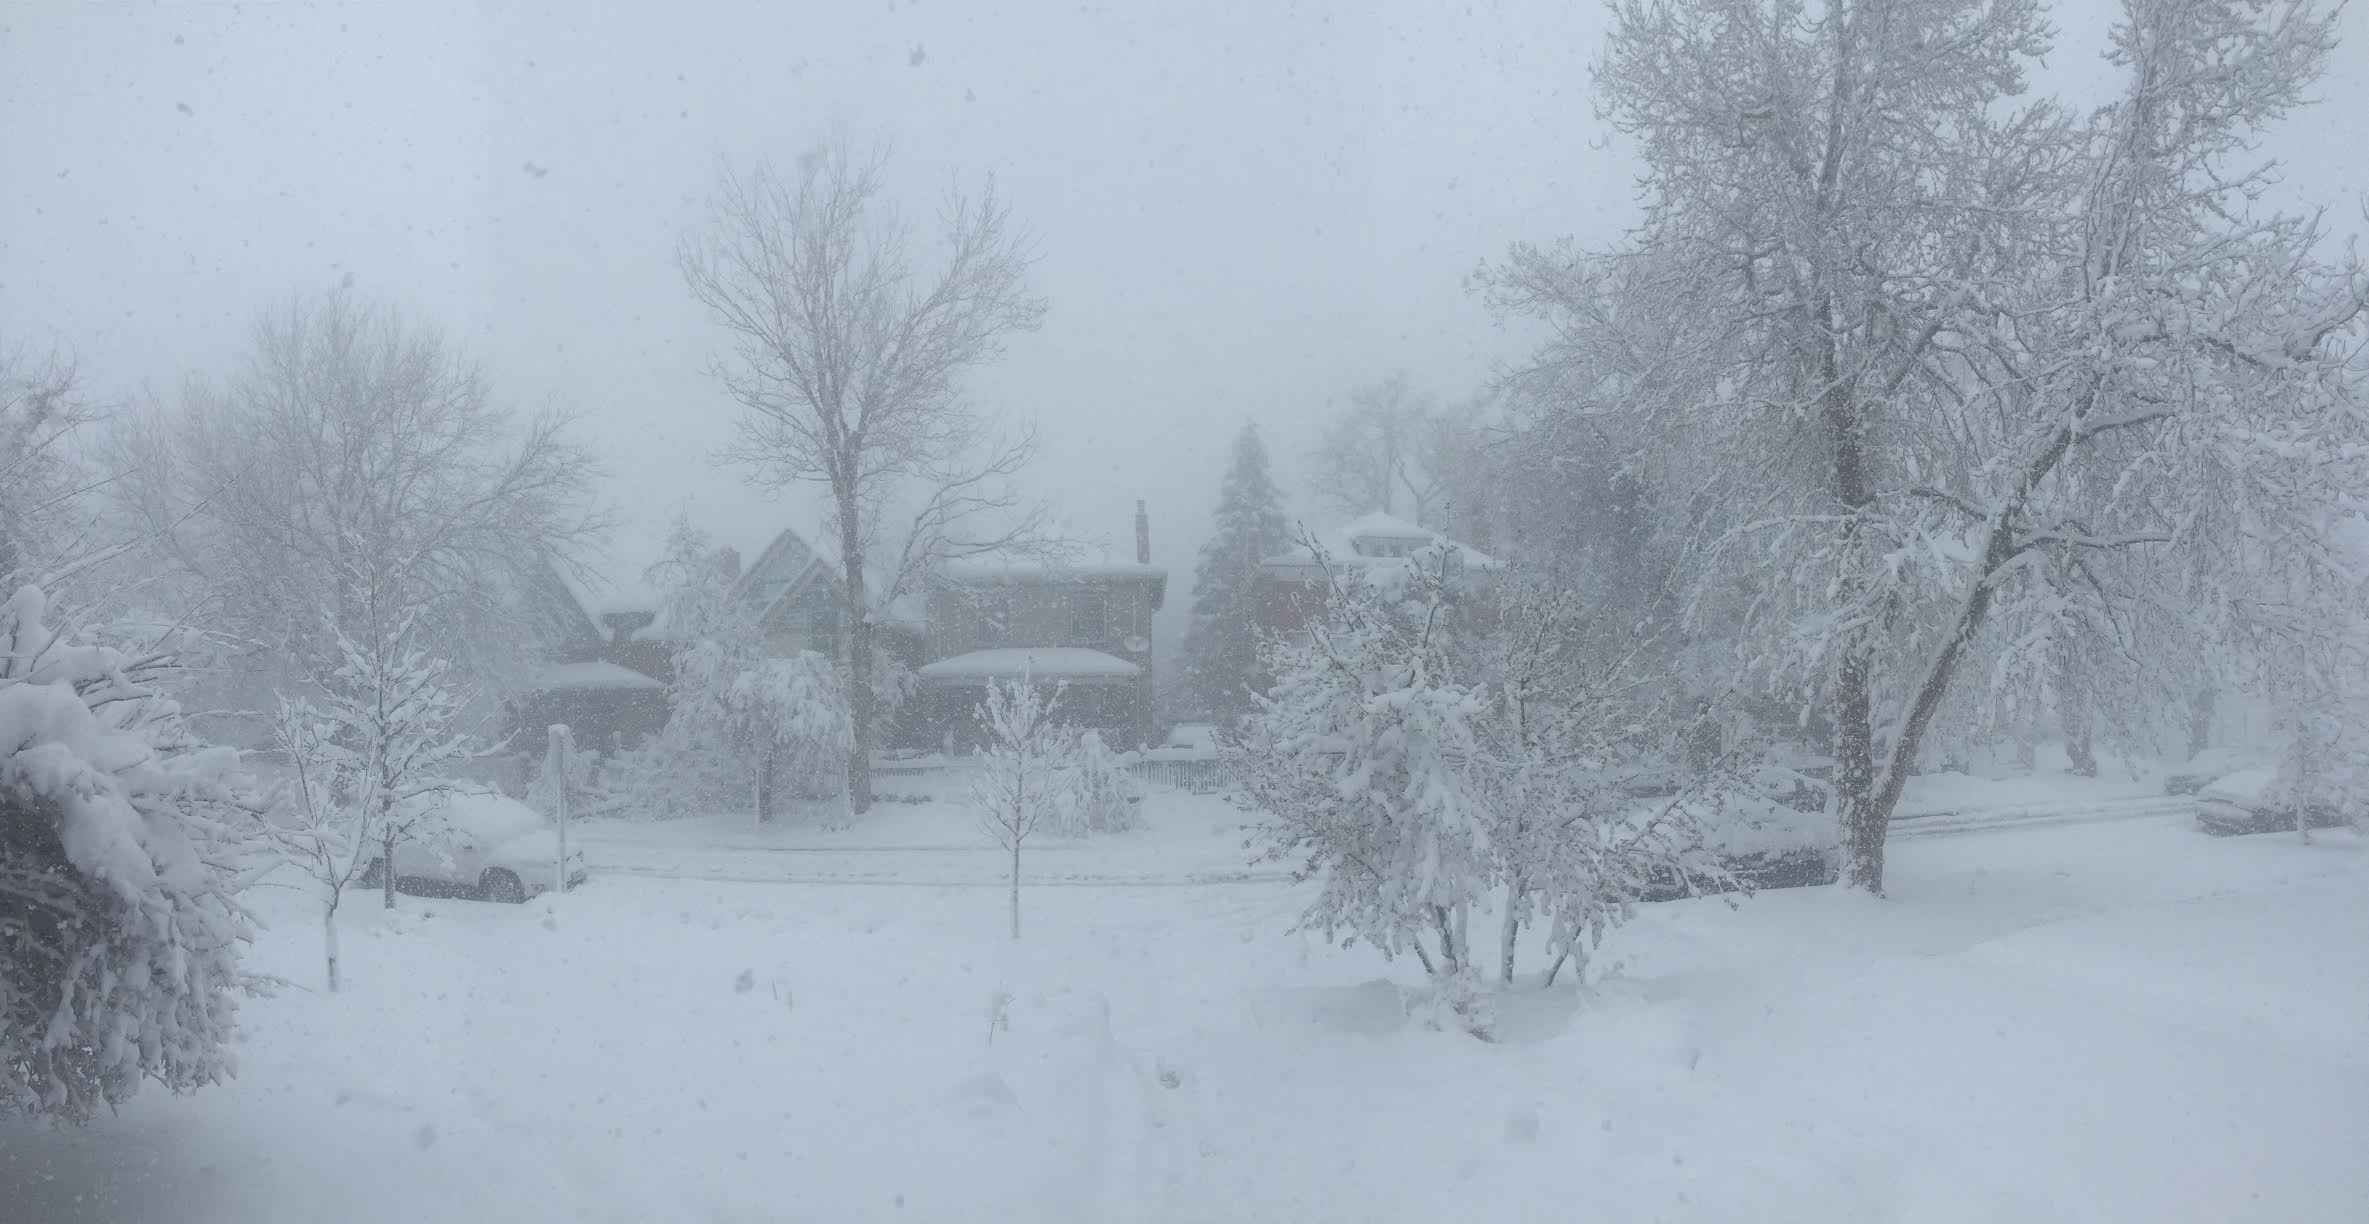 The March 23 blizzard dropped 1 to 2 feet of snow across the greater Denver area, at times visibility was near zero